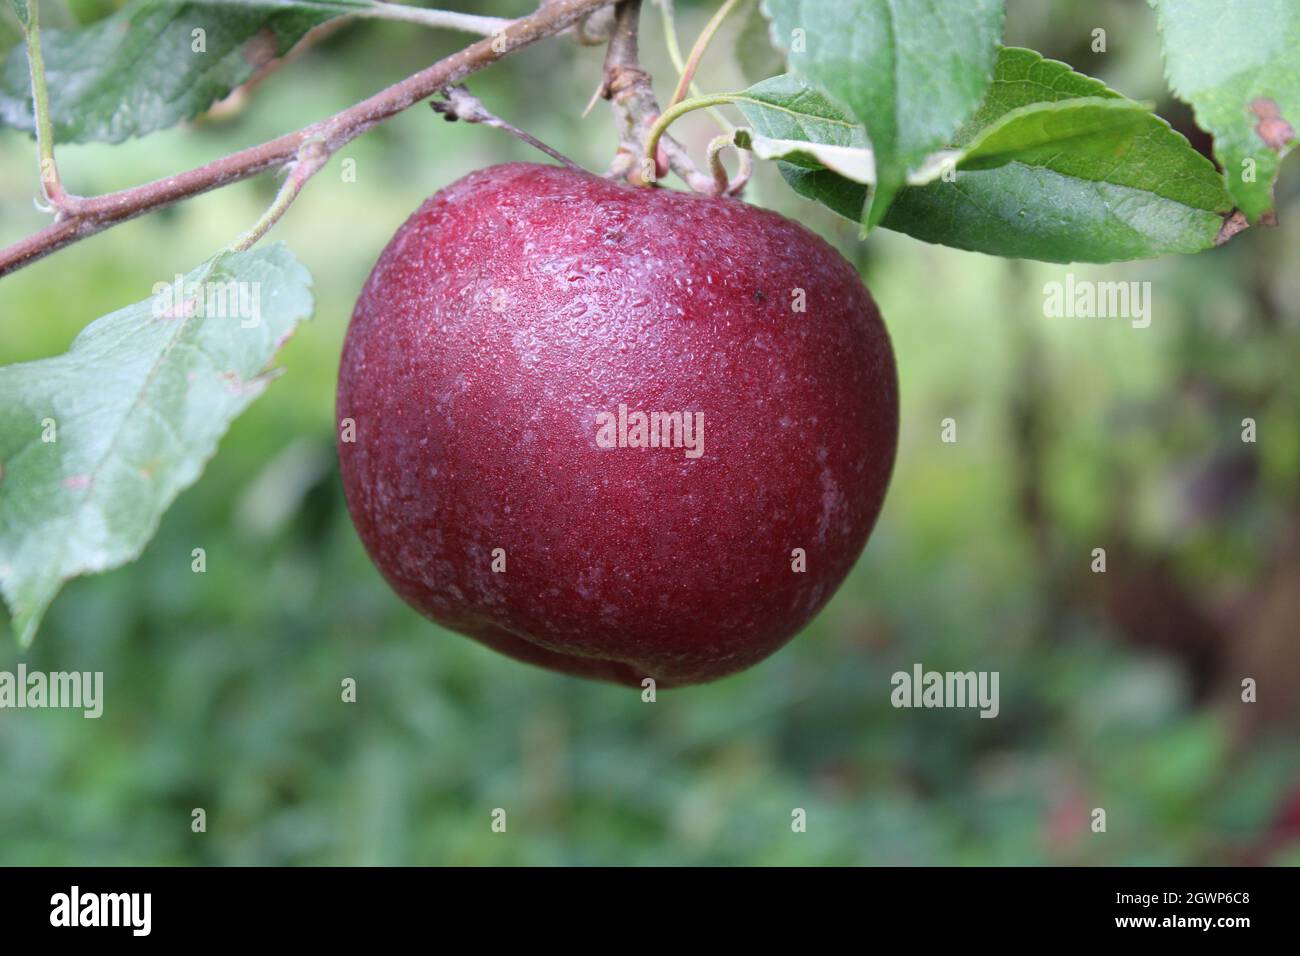 A Ripe Jonathan Apple Covered in Morning Dew Stock Photo